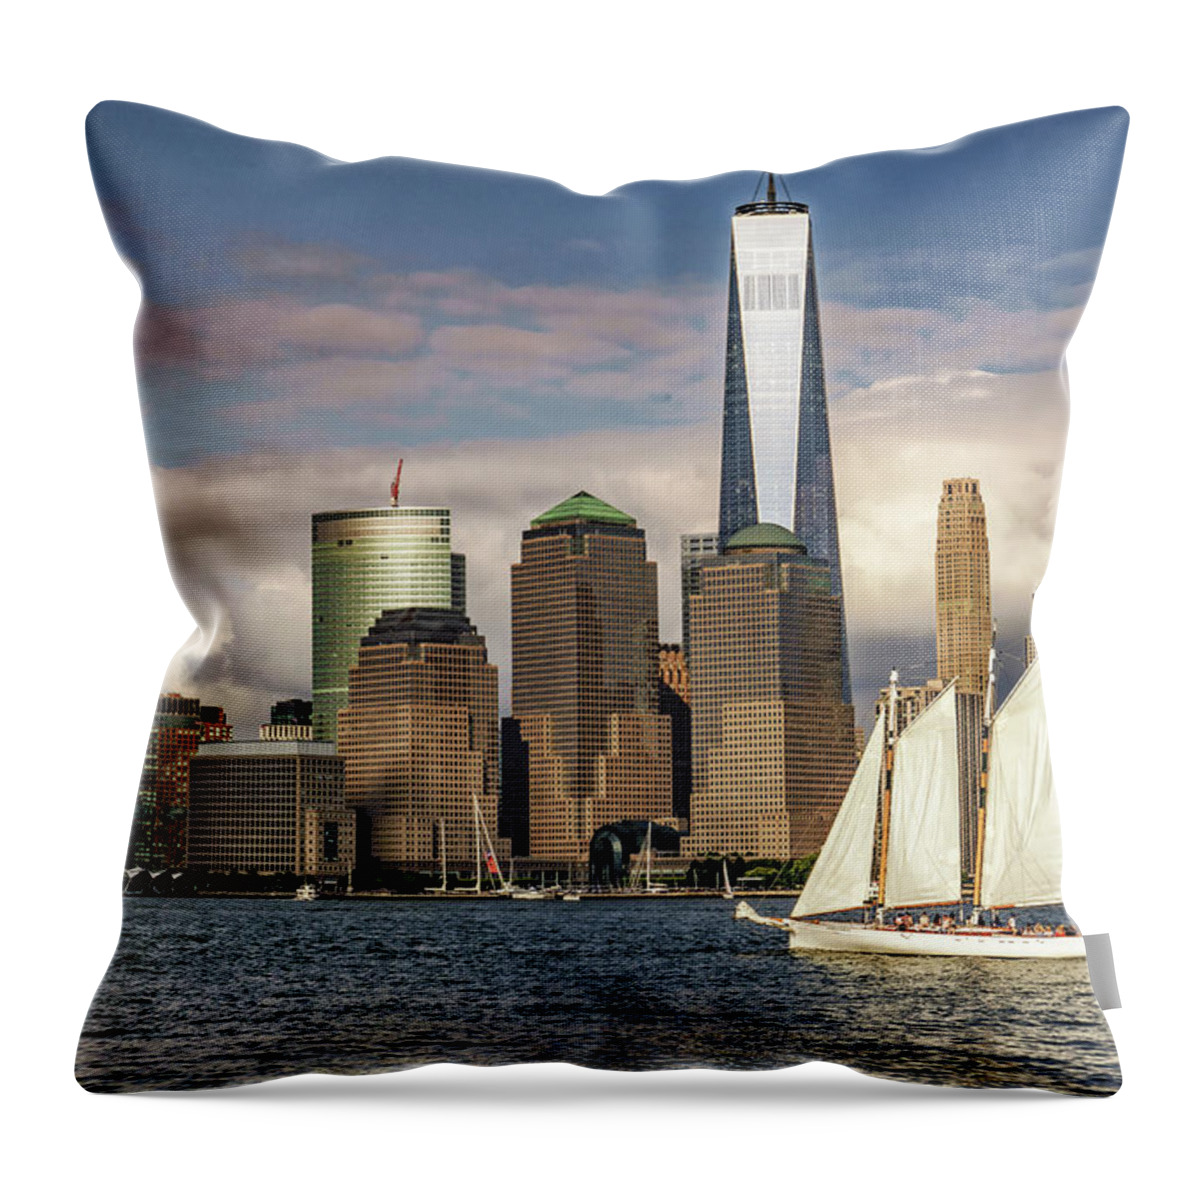 Sailboat Throw Pillow featuring the photograph Sailboat on New York Harbor by Janis Knight